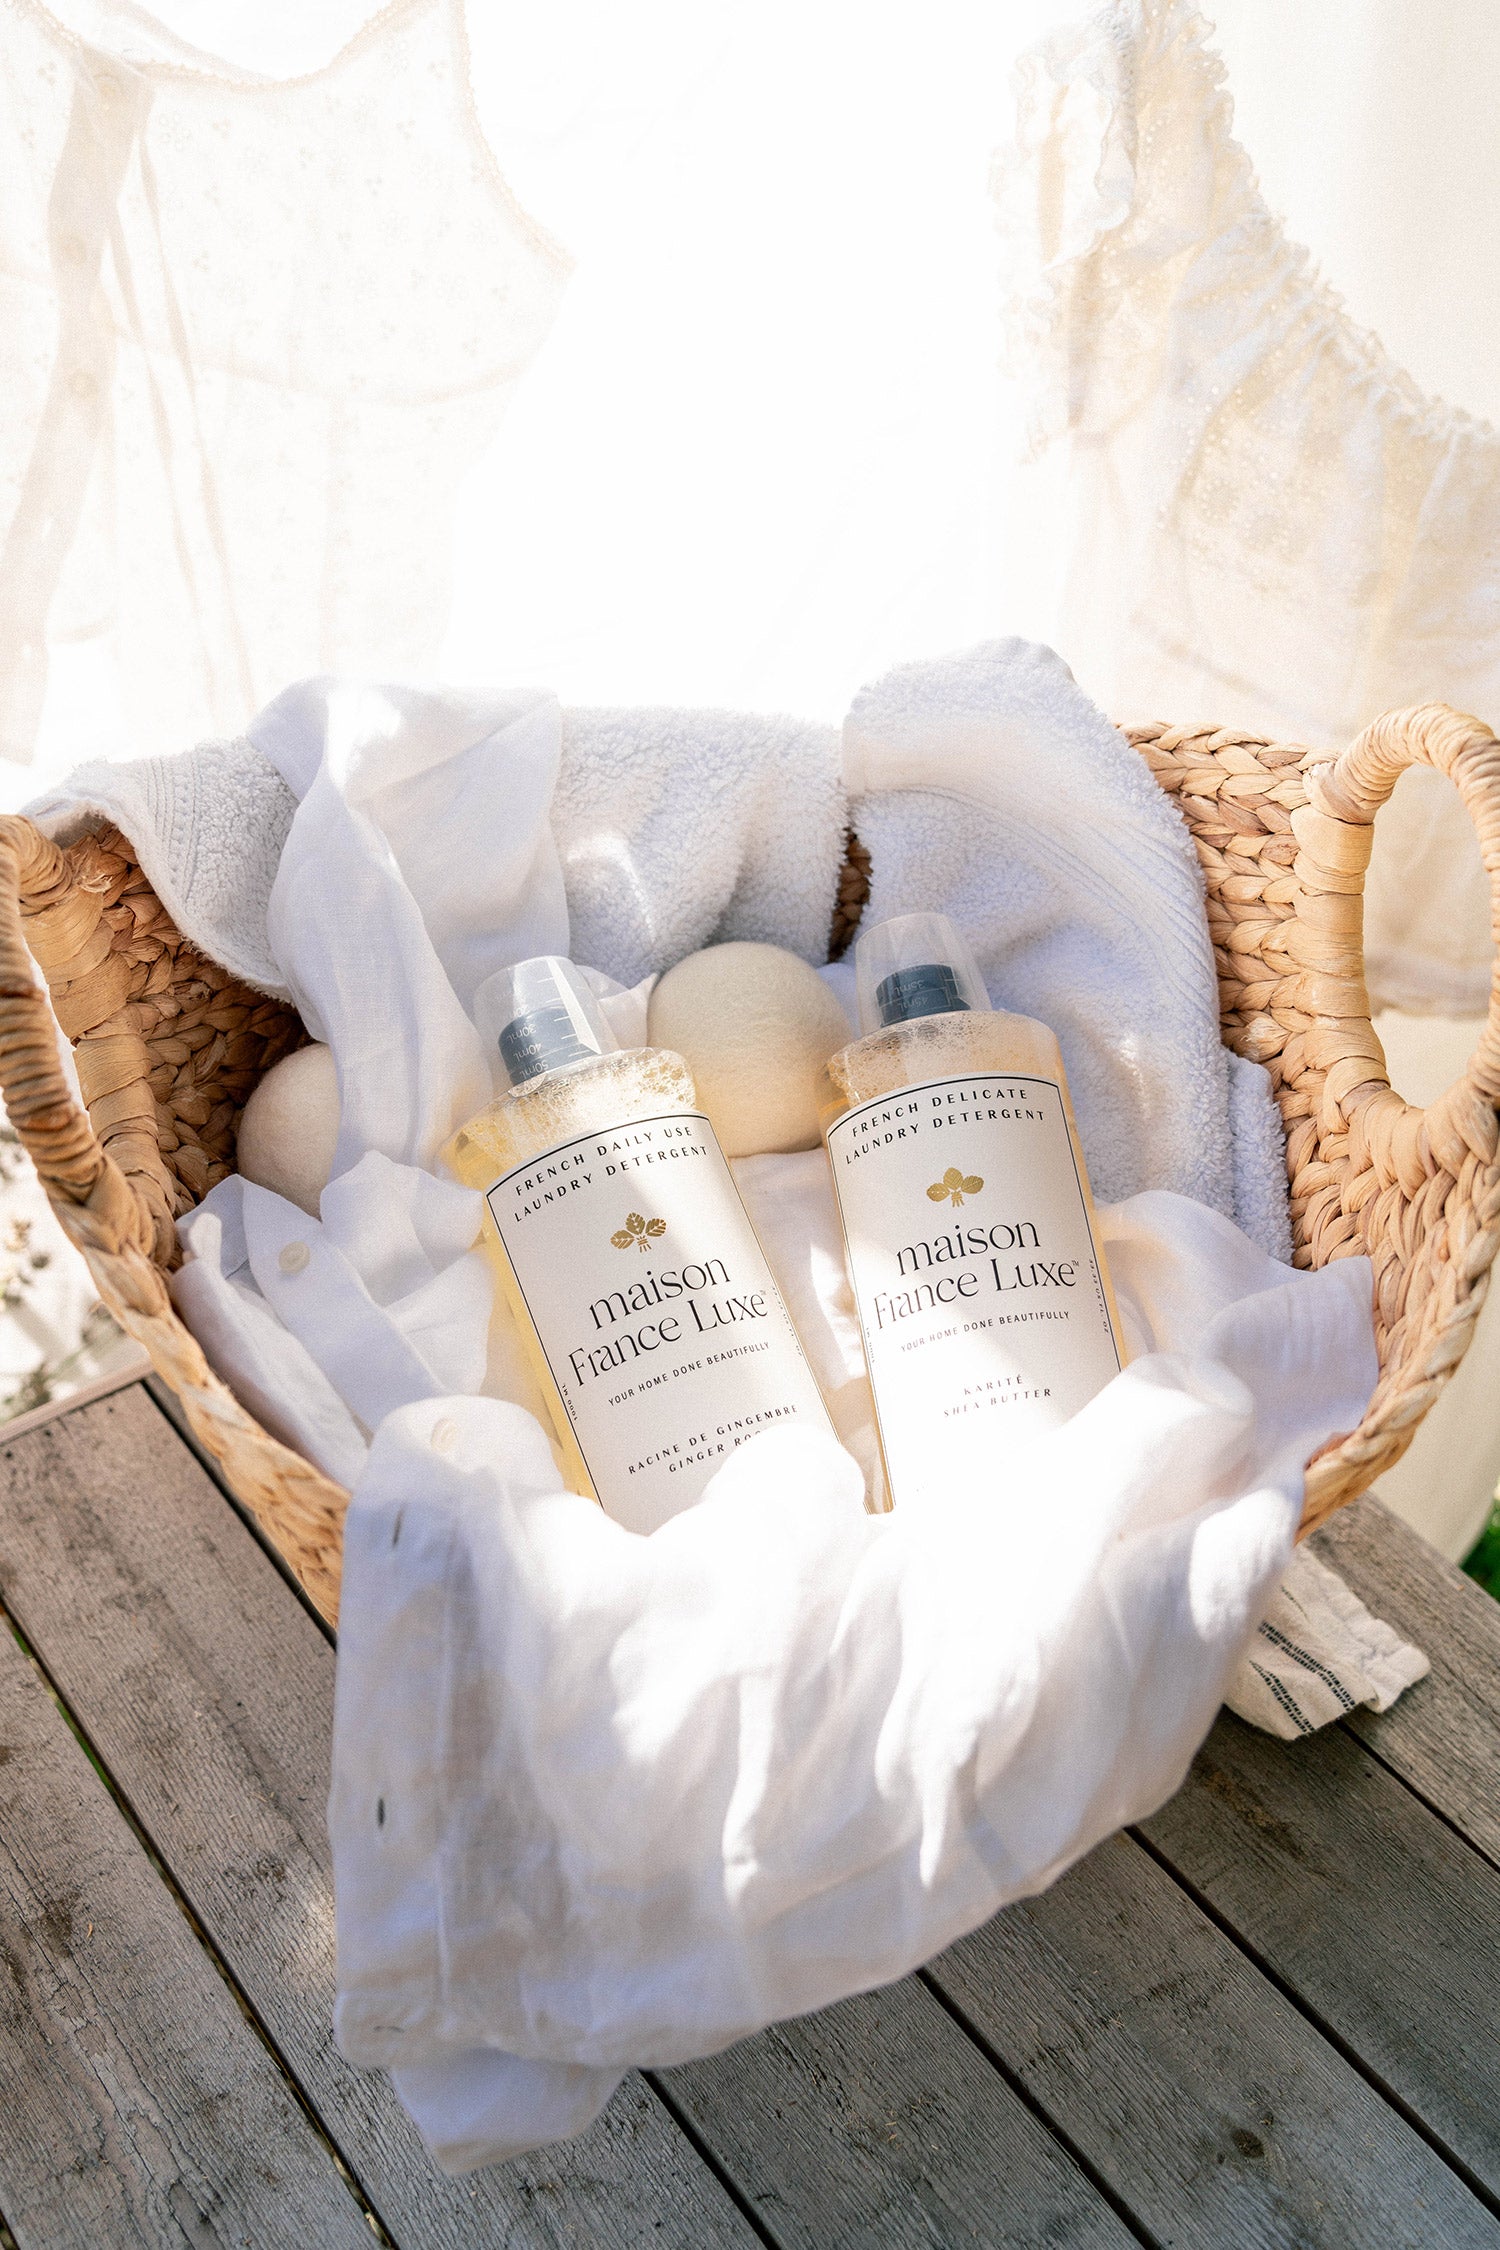 Luxury Laundry Detergent for everyday use and delicate fabrics, in a basket with white linens.